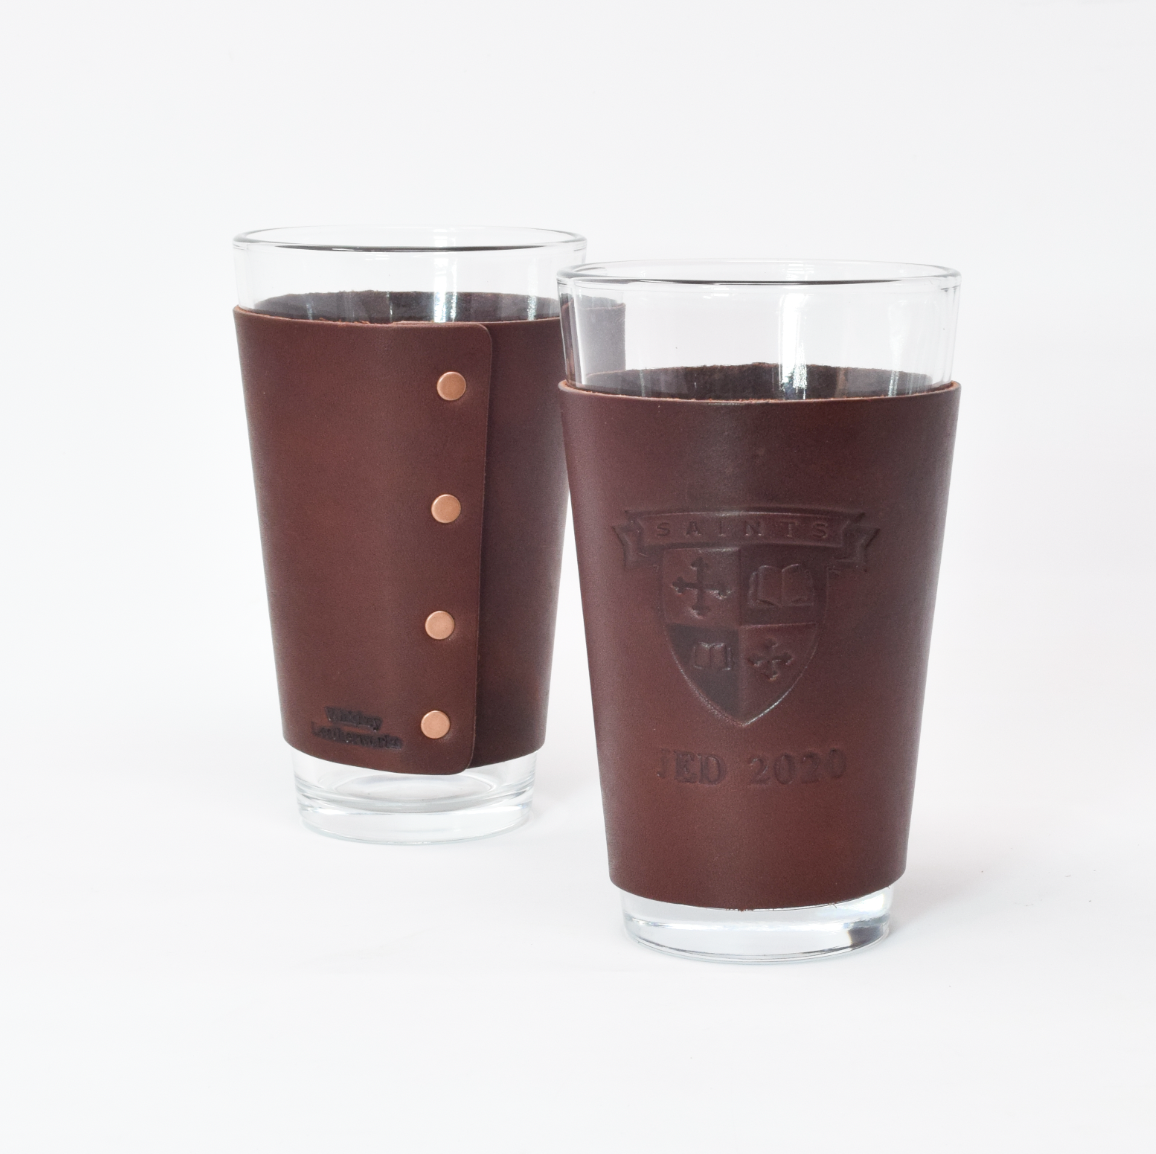 Pint Glass - Set of Two